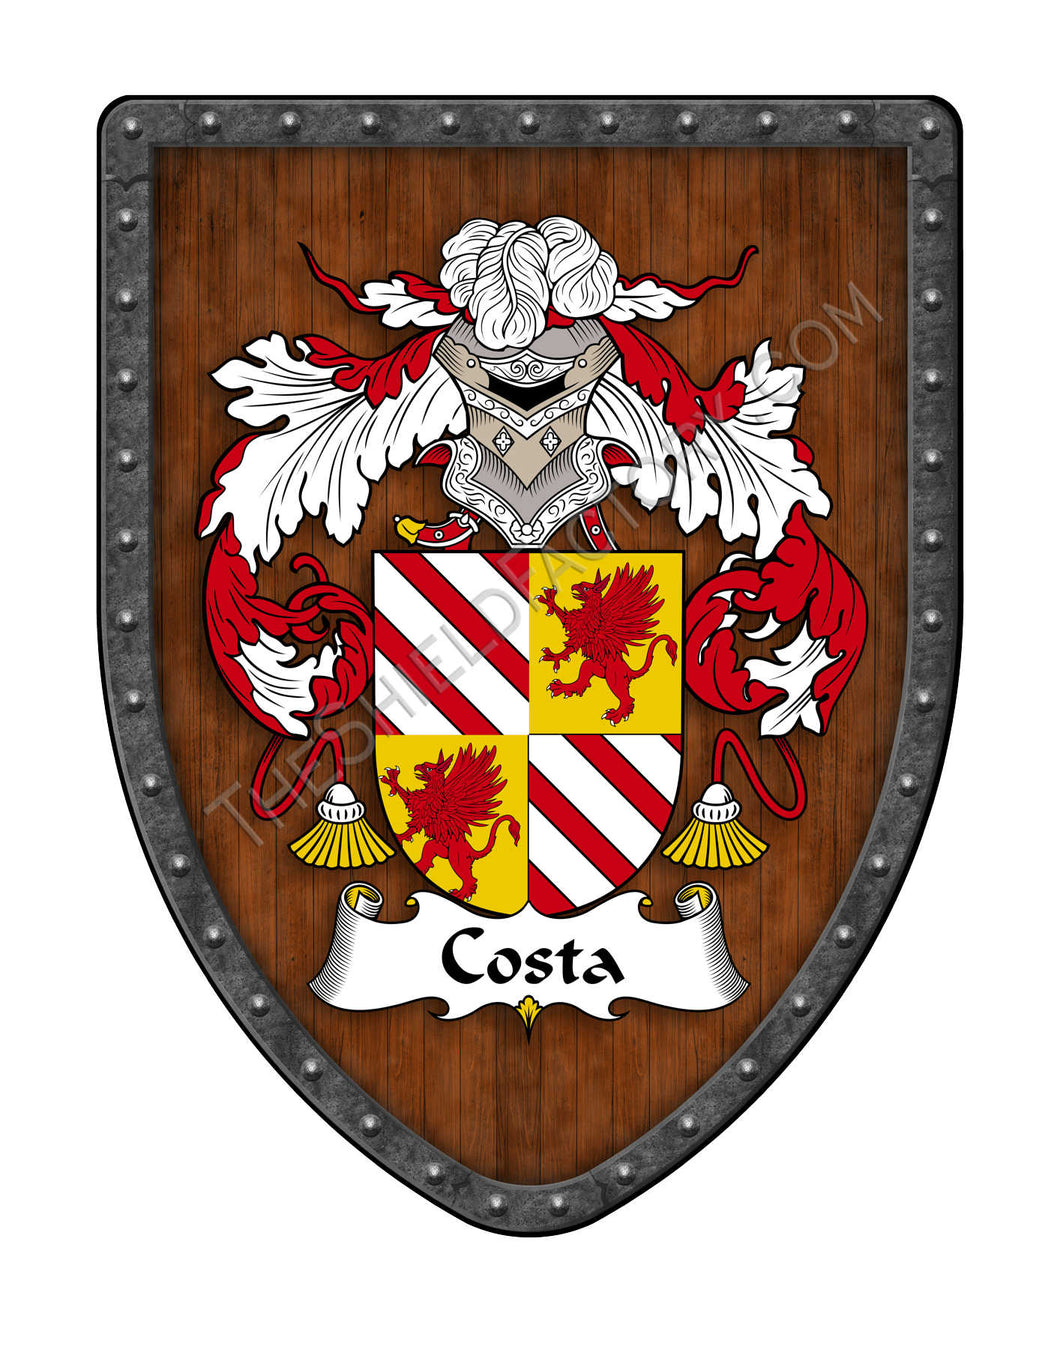 Costa Coat of Arms Shield Family Crest